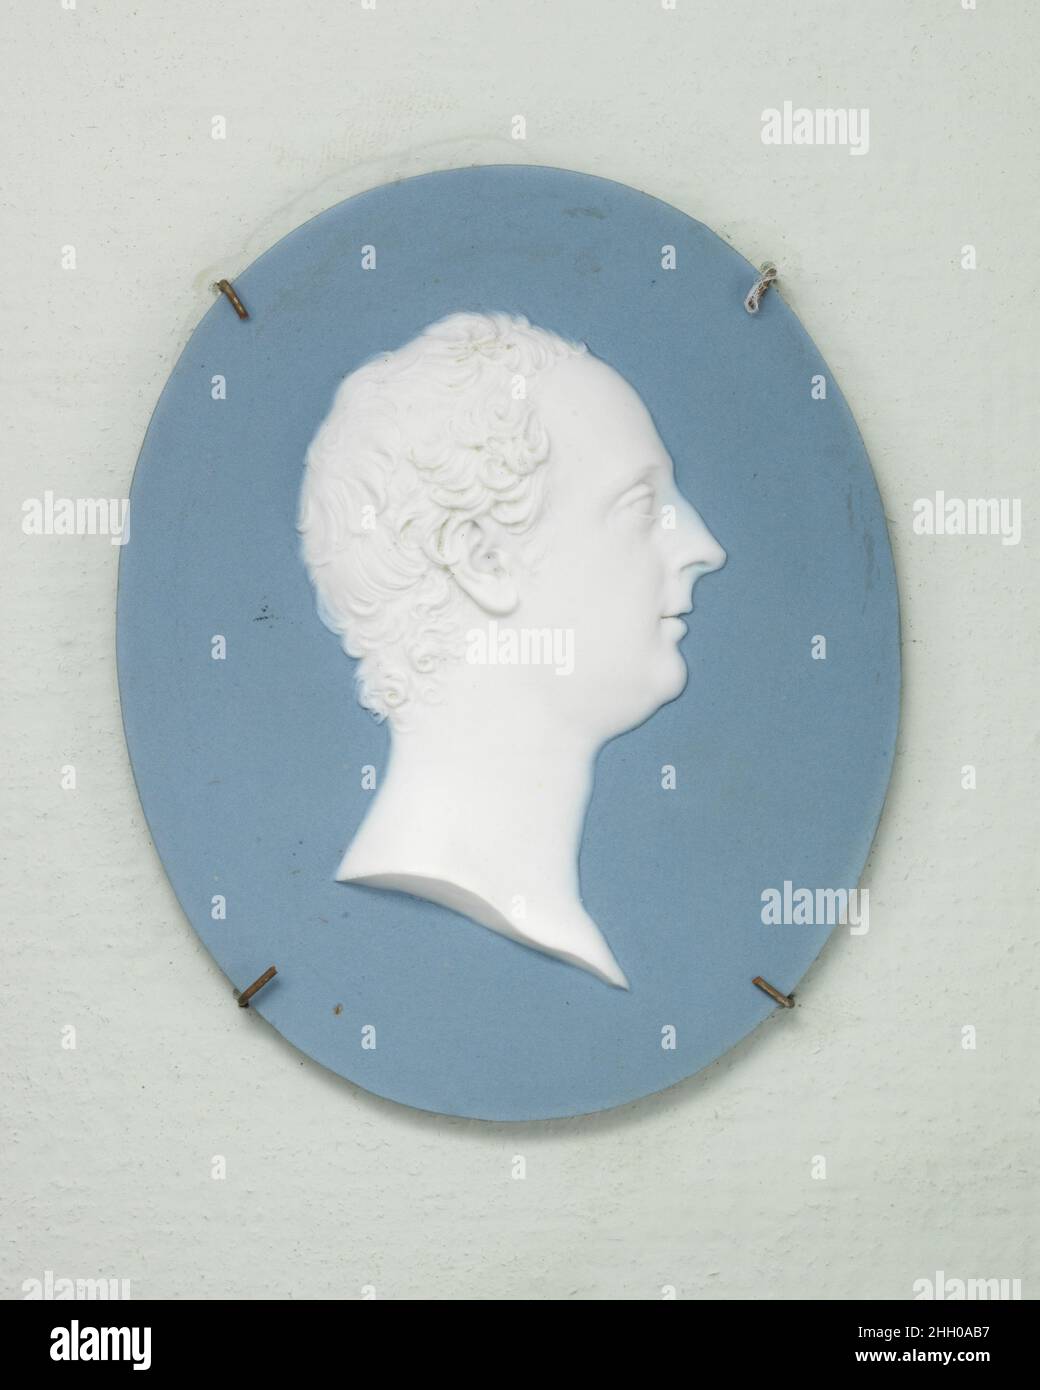 Thomas Pitt, Lord Camelford ca. 1780 Wedgwood and Bentley Cameo medallions with portrait reliefs were made by Josiah Wedgwood between 1765 and 1795, with Thomas Bentley as his partner from 1769 to 1780. Black basalt and jasper are both types of fine stoneware hard enough for the delicate modeling which distinguishes Wedgwood's portrait cameos of 'Illustious Ancents and Moderns.'. Thomas Pitt, Lord Camelford. British, Etruria, Staffordshire. ca. 1780. Jasperware. Ceramics-Pottery Stock Photo